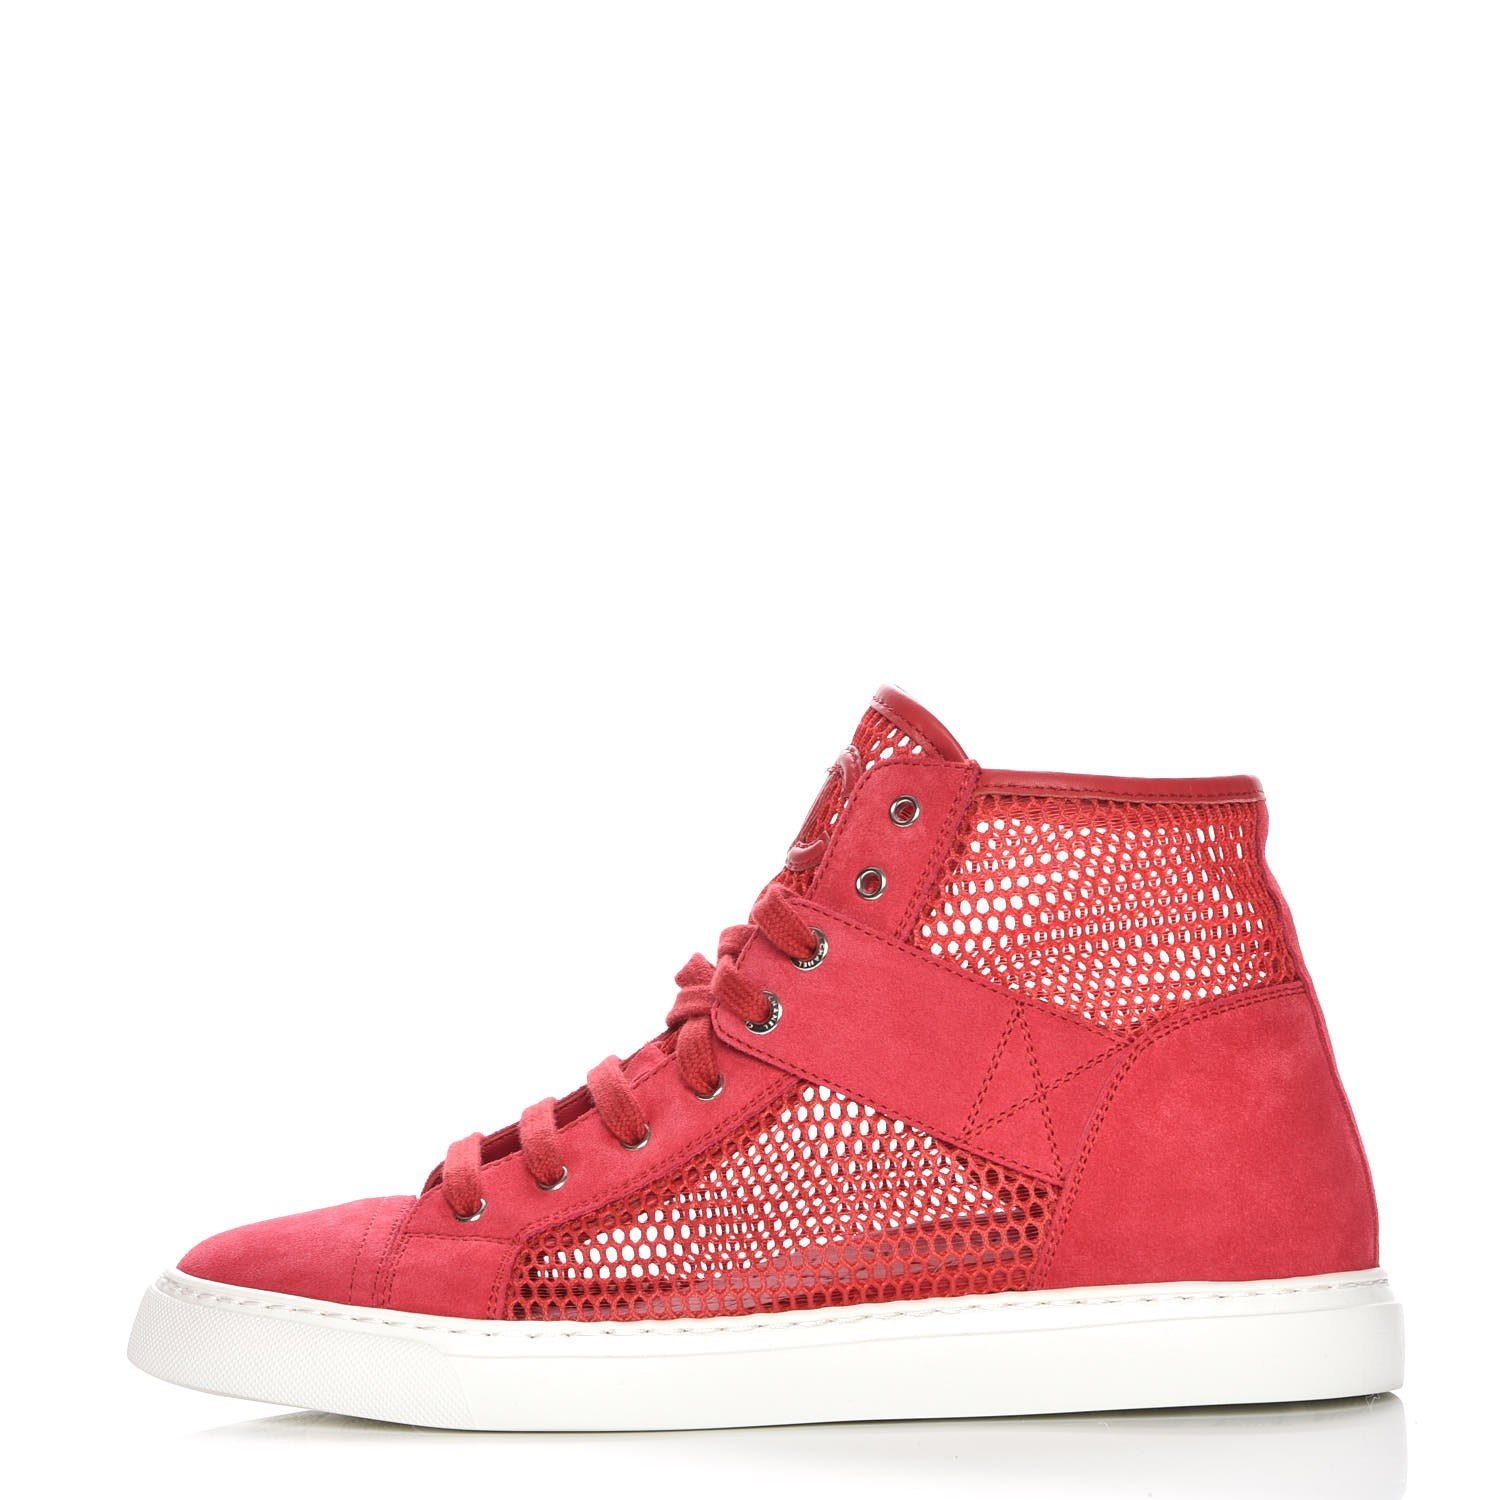 CHANEL Mesh Suede High Top Sneakers 38 Red 227398 | FASHIONPHILE